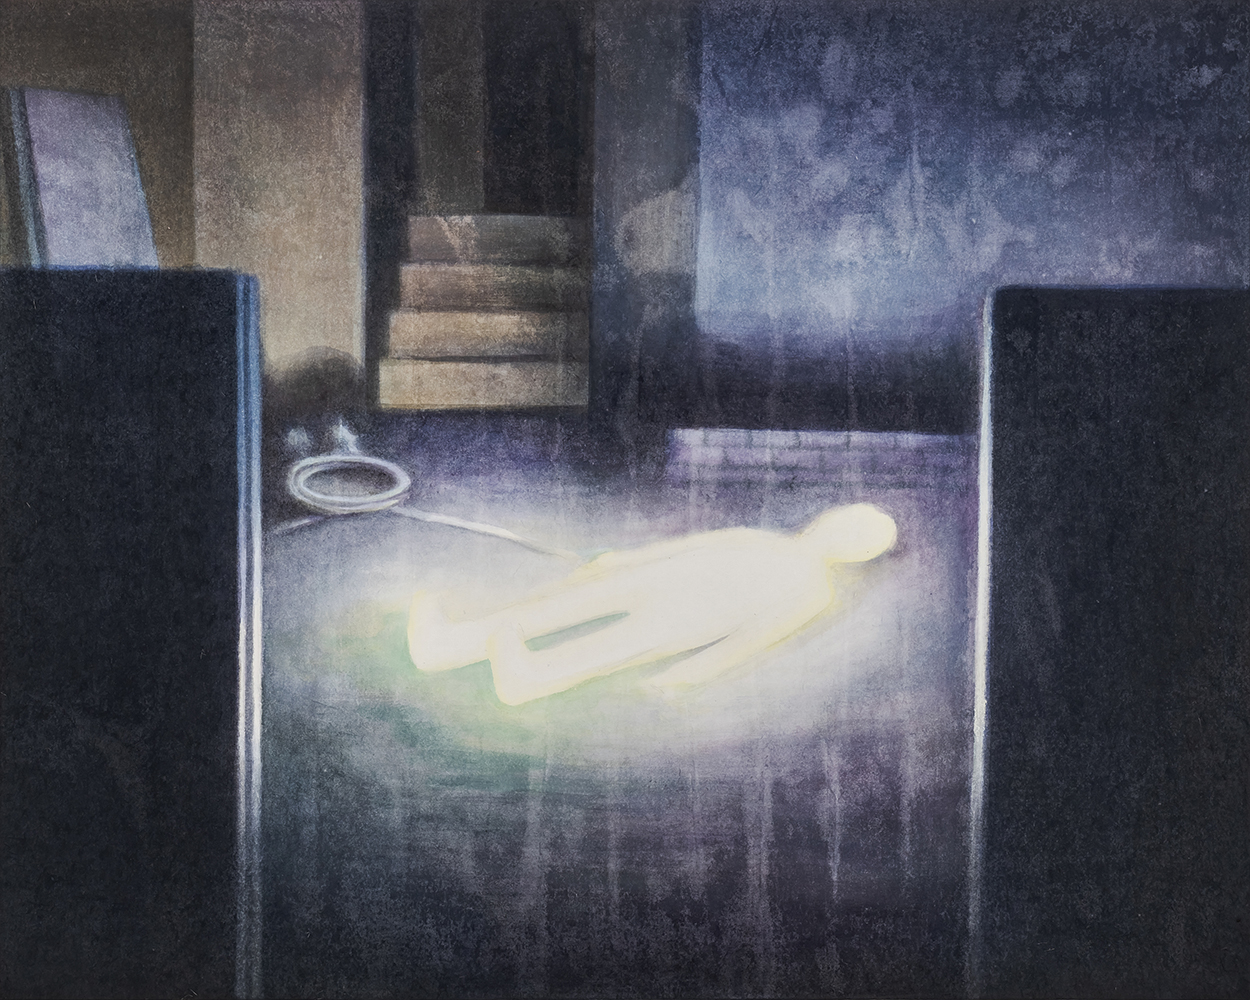 Painting. A glowing light shaped like a body lies on the floor of a dark room. Stairs in the background suggest perhaps the room is a basement.